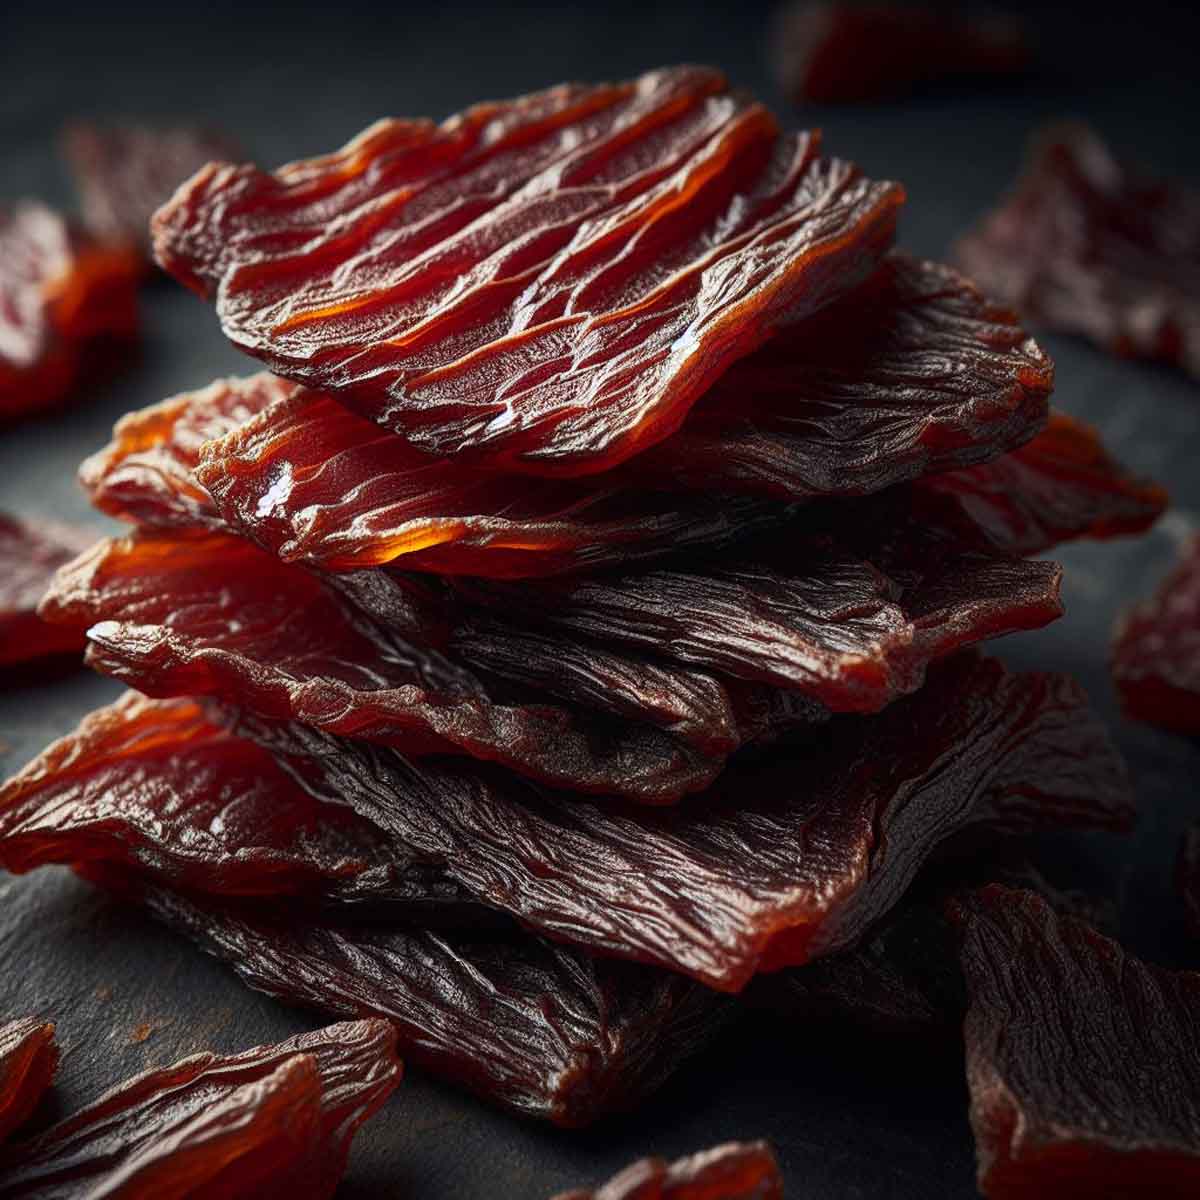 Perfectly dehydrated beef jerky with a rich brown color and dry texture.